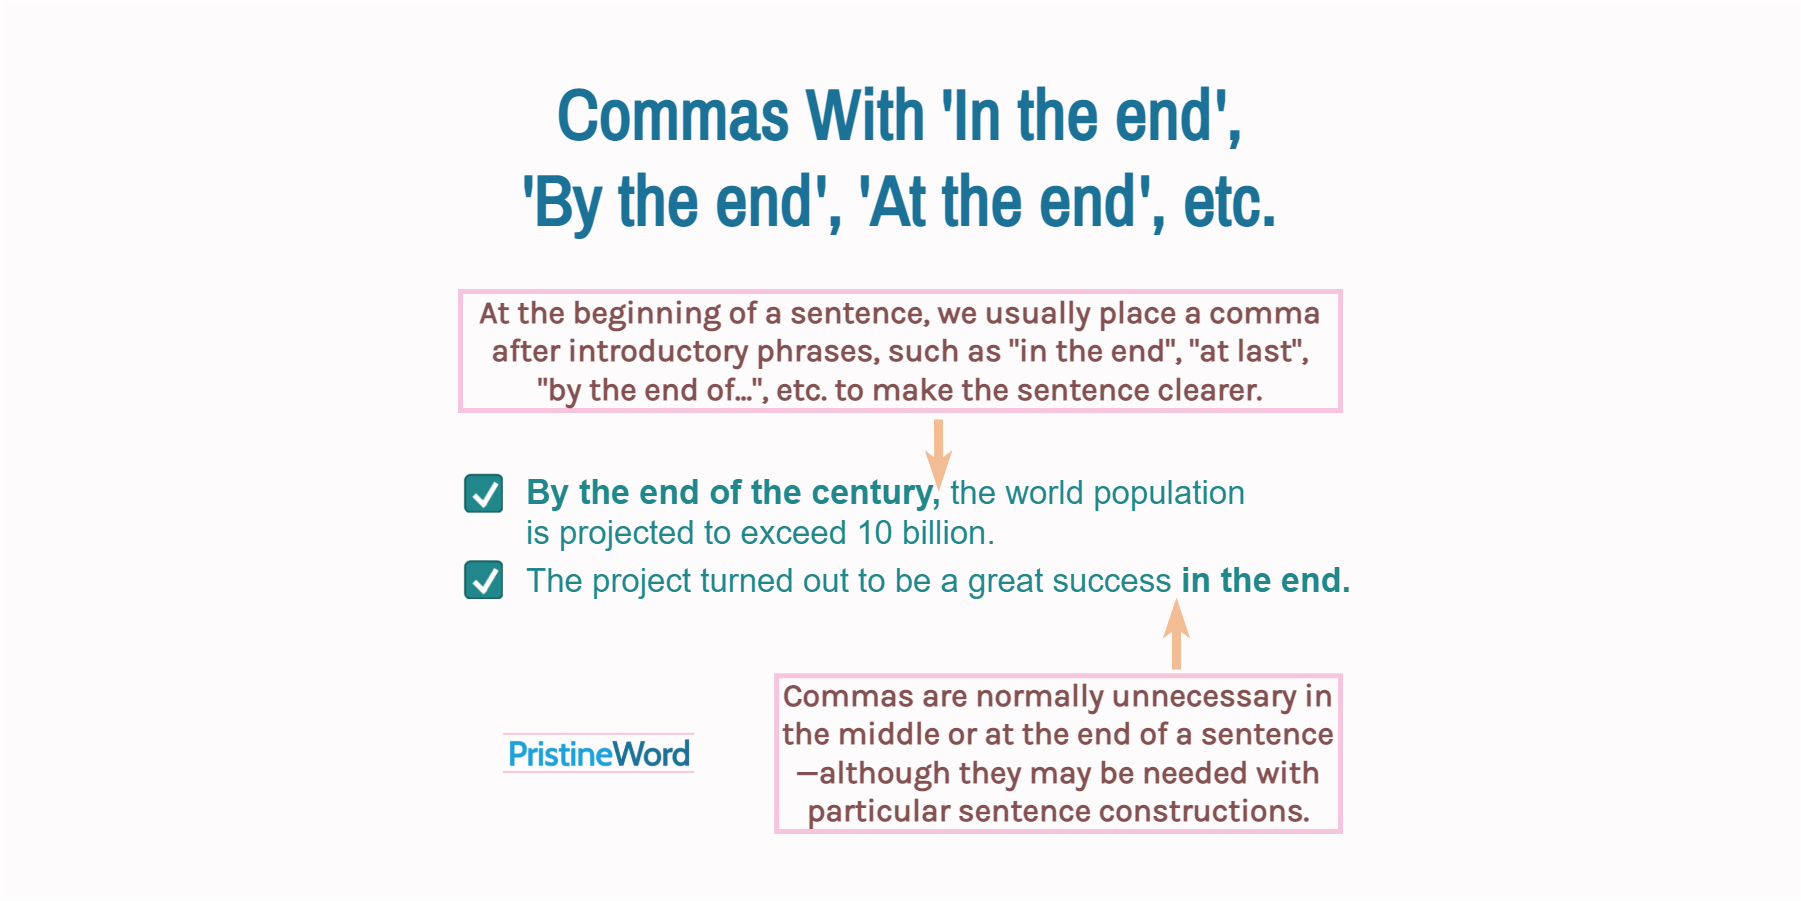 Commas After 'In the end', 'By the end', 'At the end', 'At last', or 'At the latest'